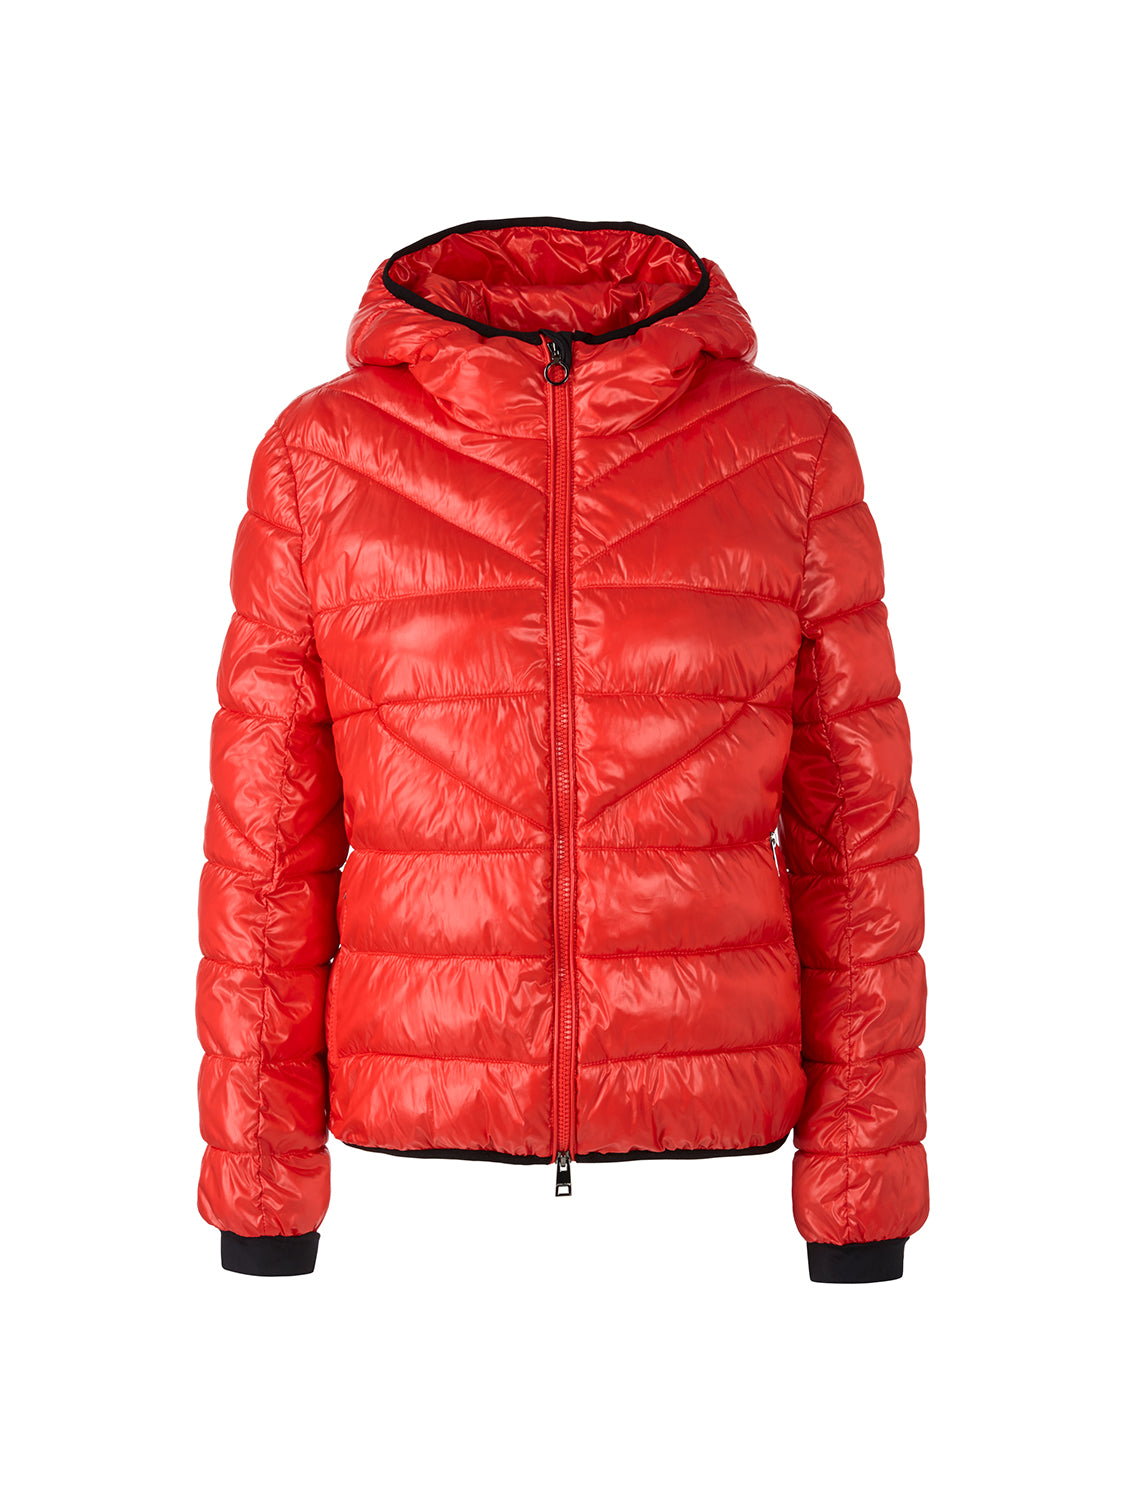 MarcCain “Rethink Together” outdoor jacket VS 12.04 W30